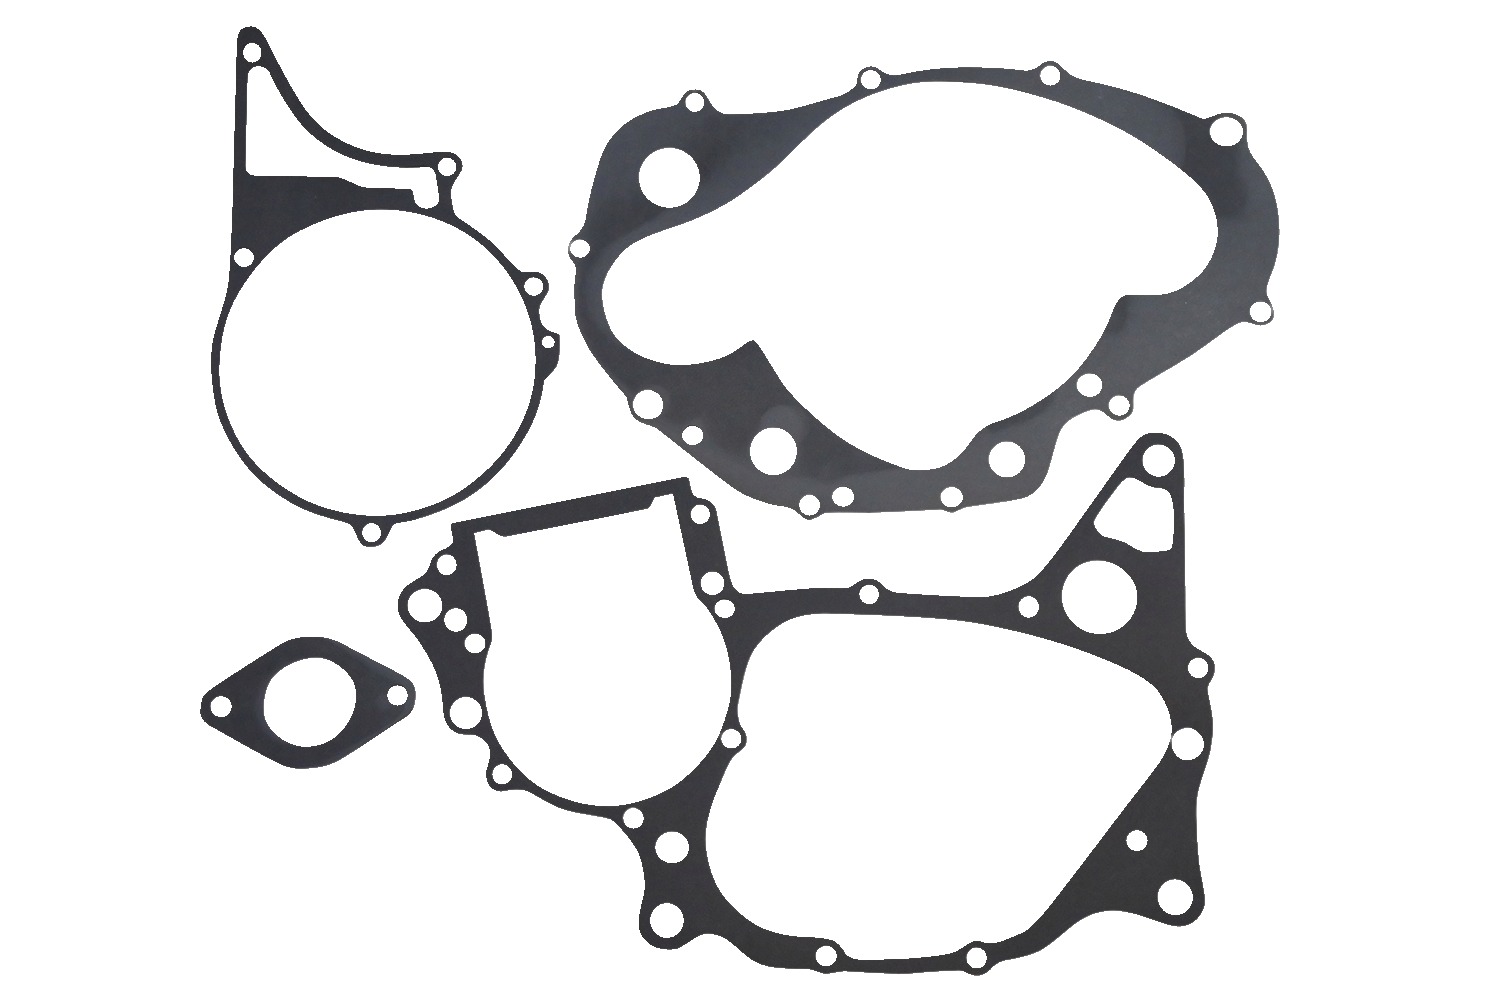 Lower Engine Gasket Kit - For 76-78 Honda CR125 - Click Image to Close